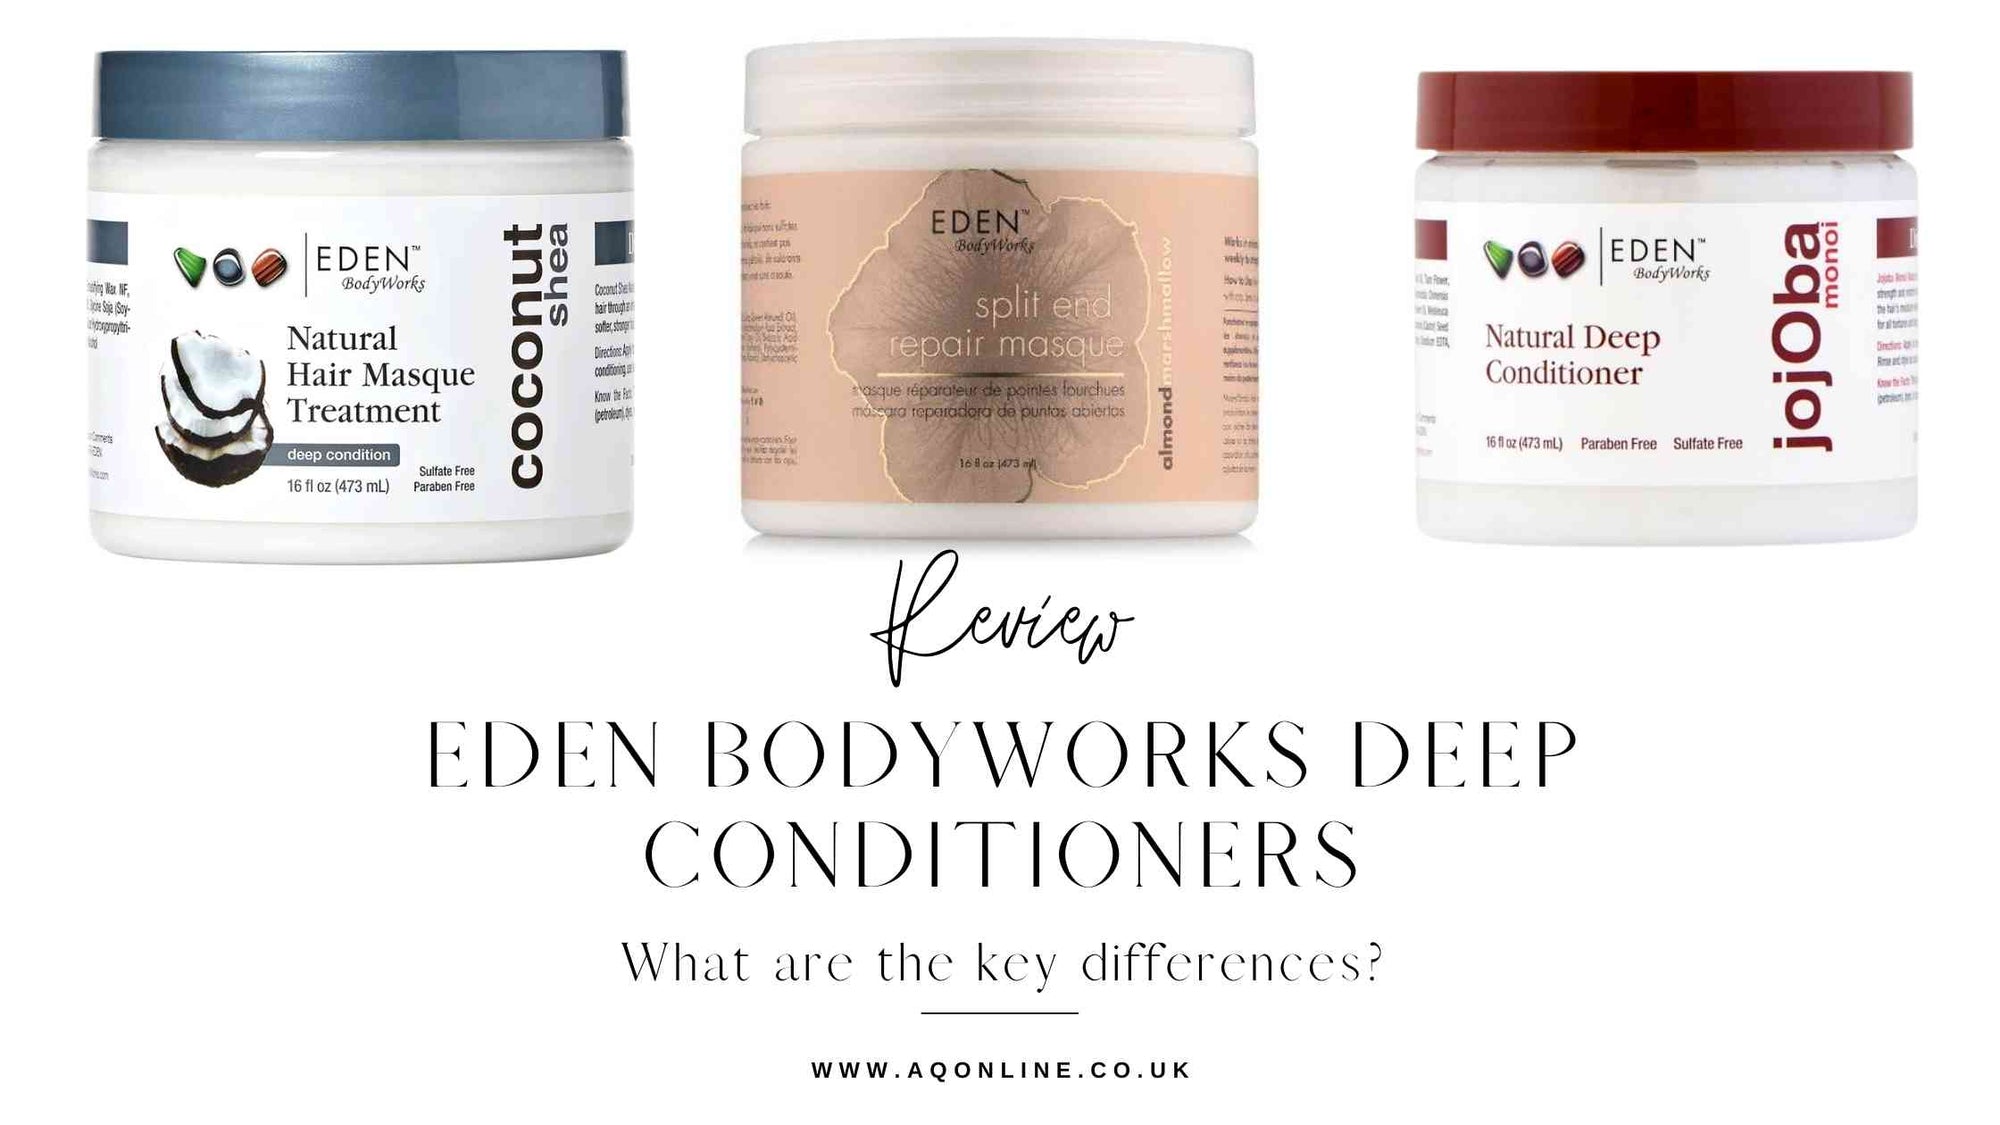 Review of All The Eden BodyWorks Deep Conditioners What Did We Find - AQ Online